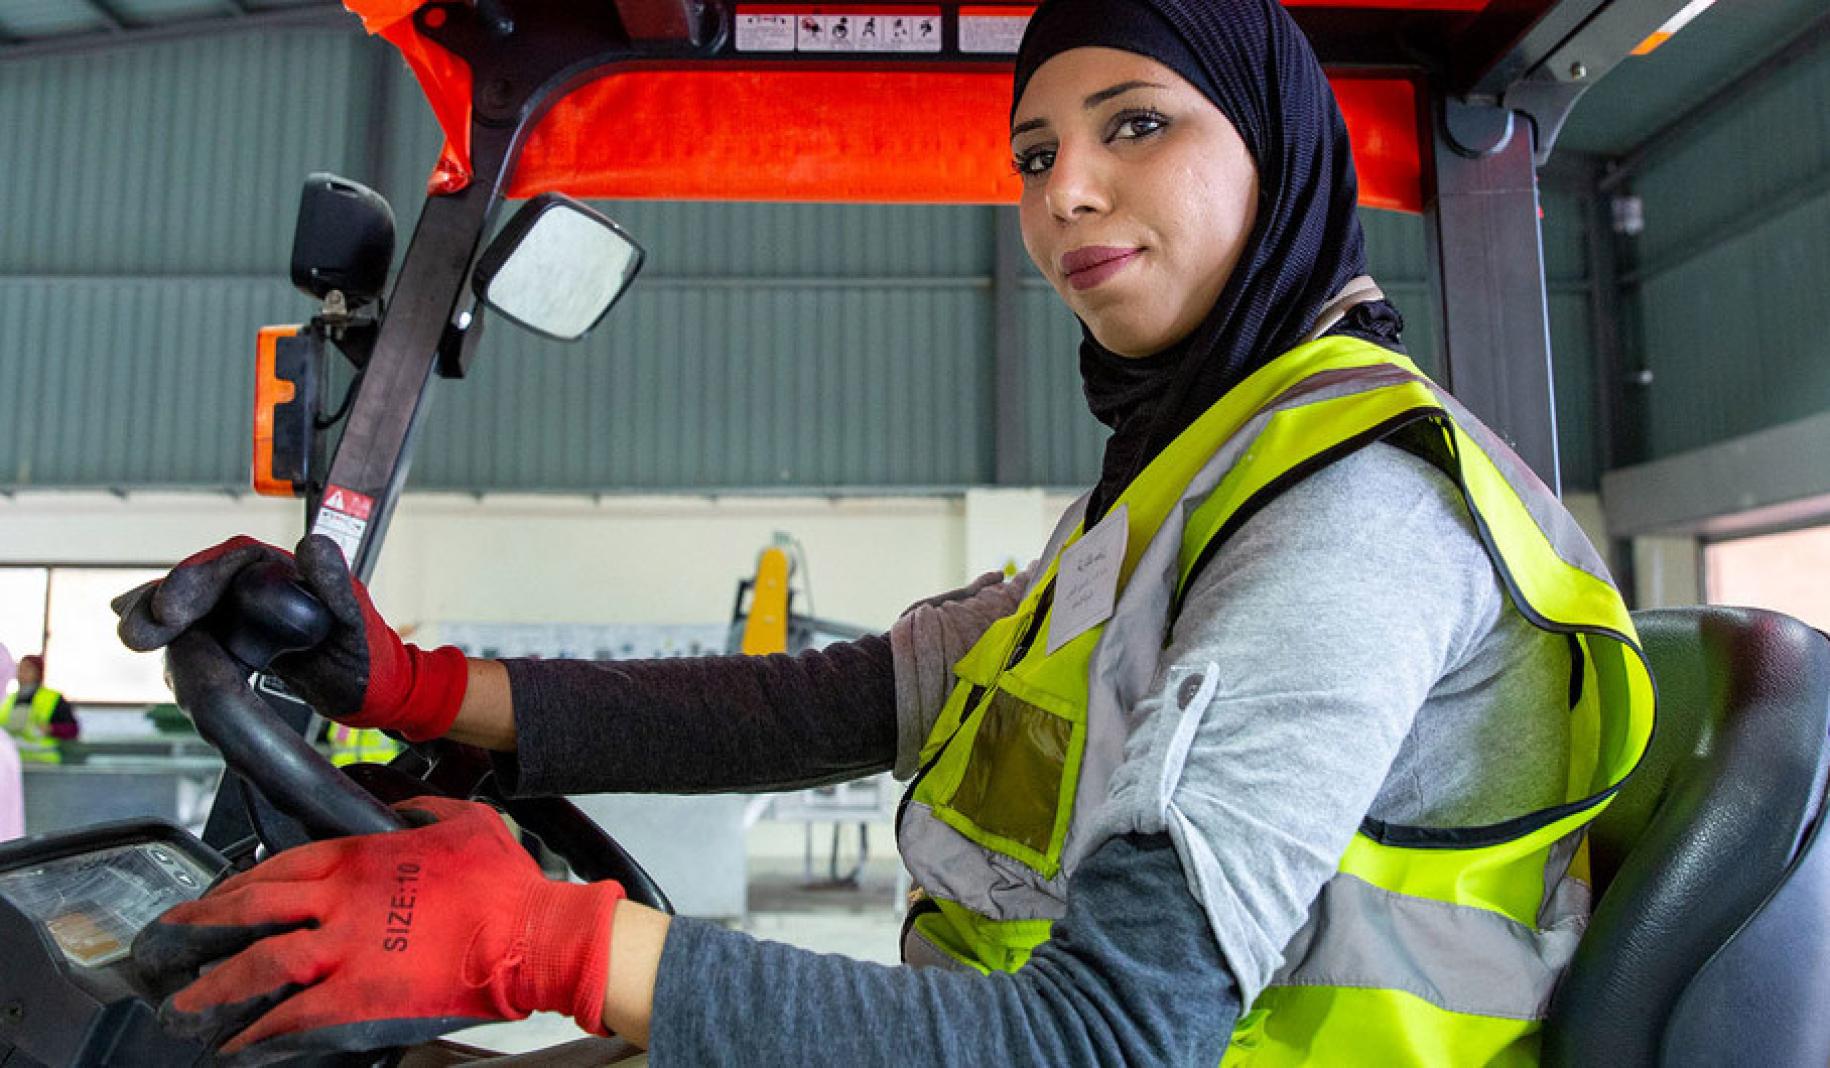 A woman drives a forklift truck at the recycling plant where she works in Northern Shouneh, Jordan.